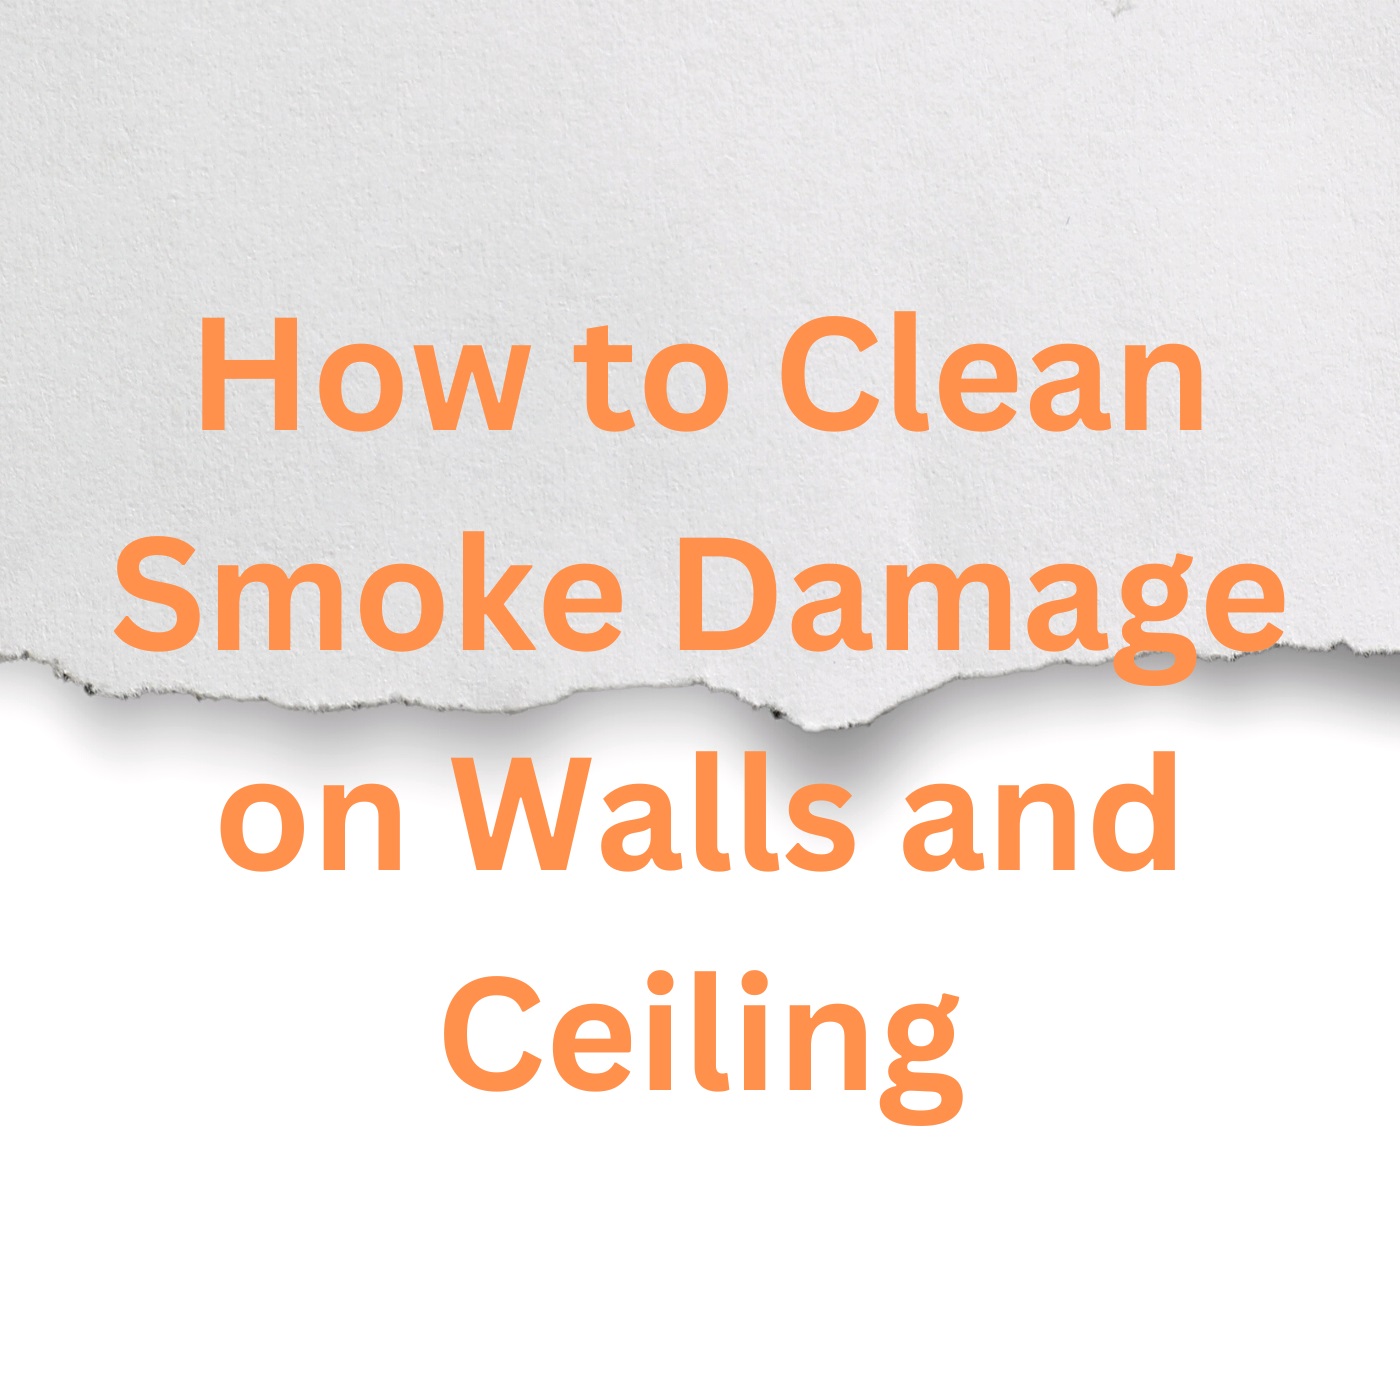 How to Clean Smoke Damage on Walls and Ceiling